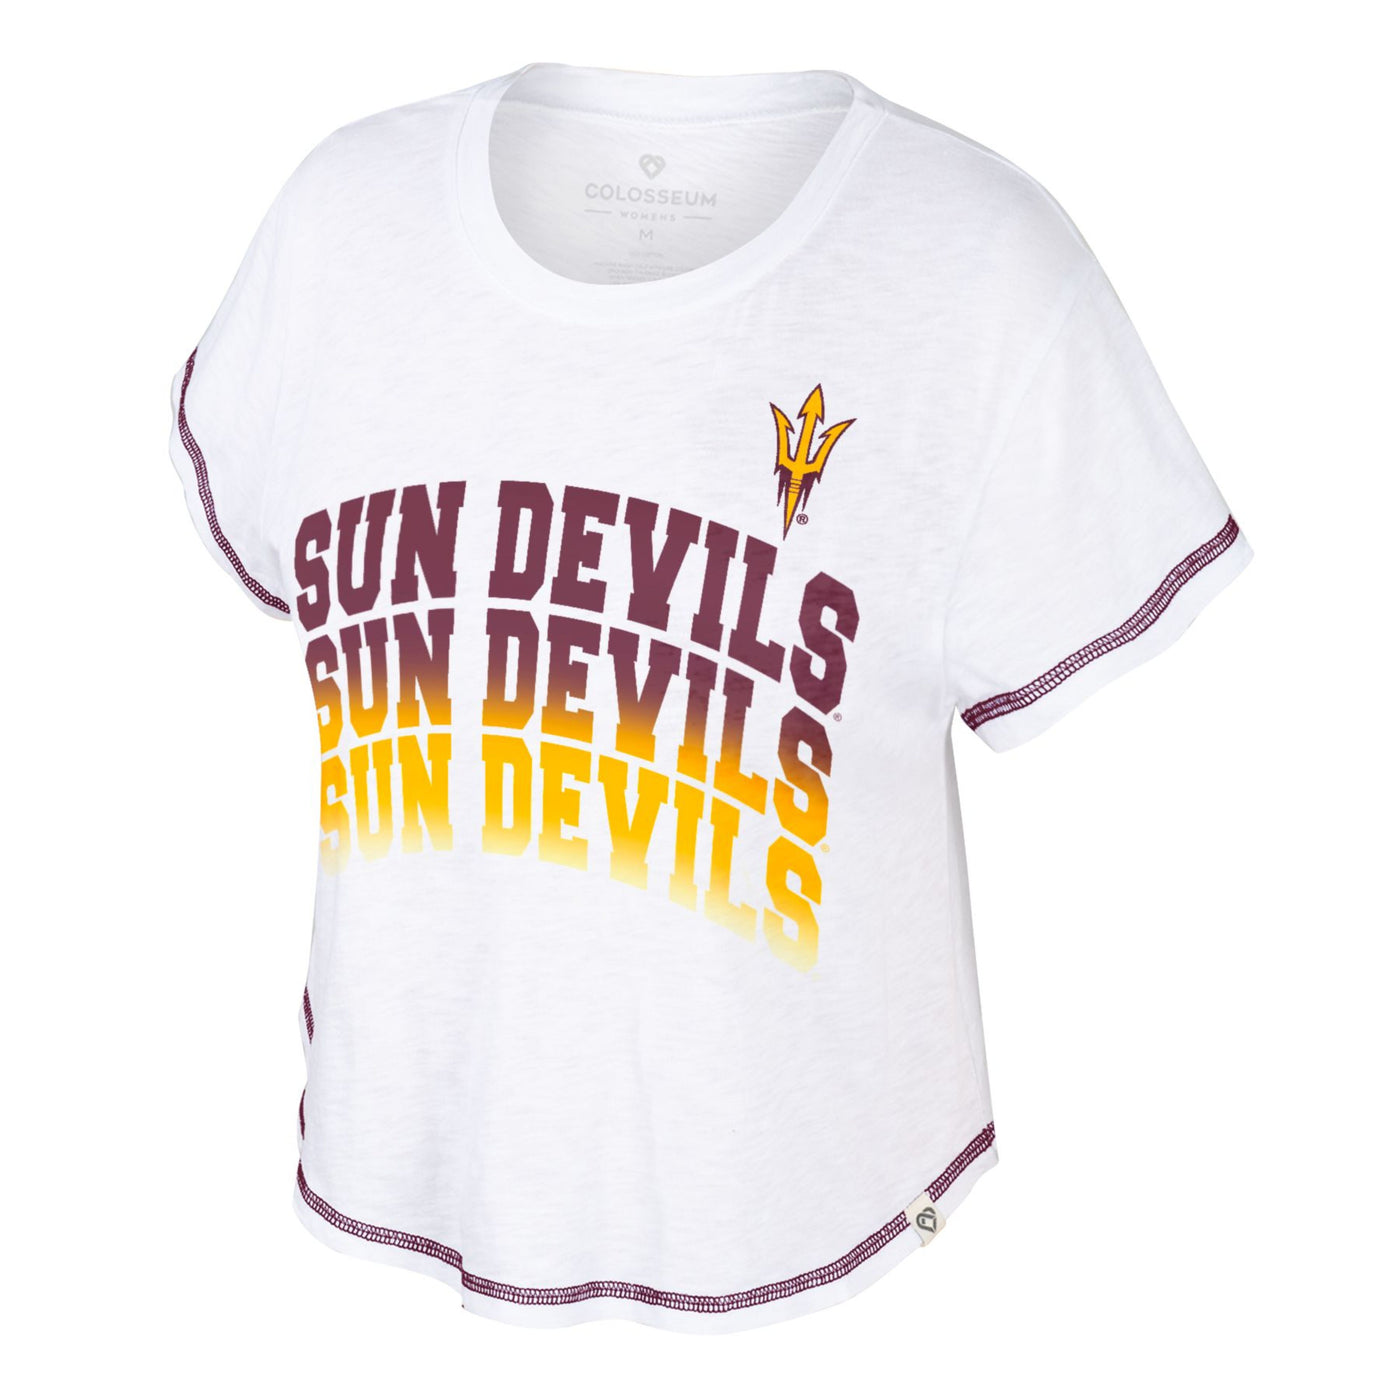 ASU white crop top with three rows of the text 